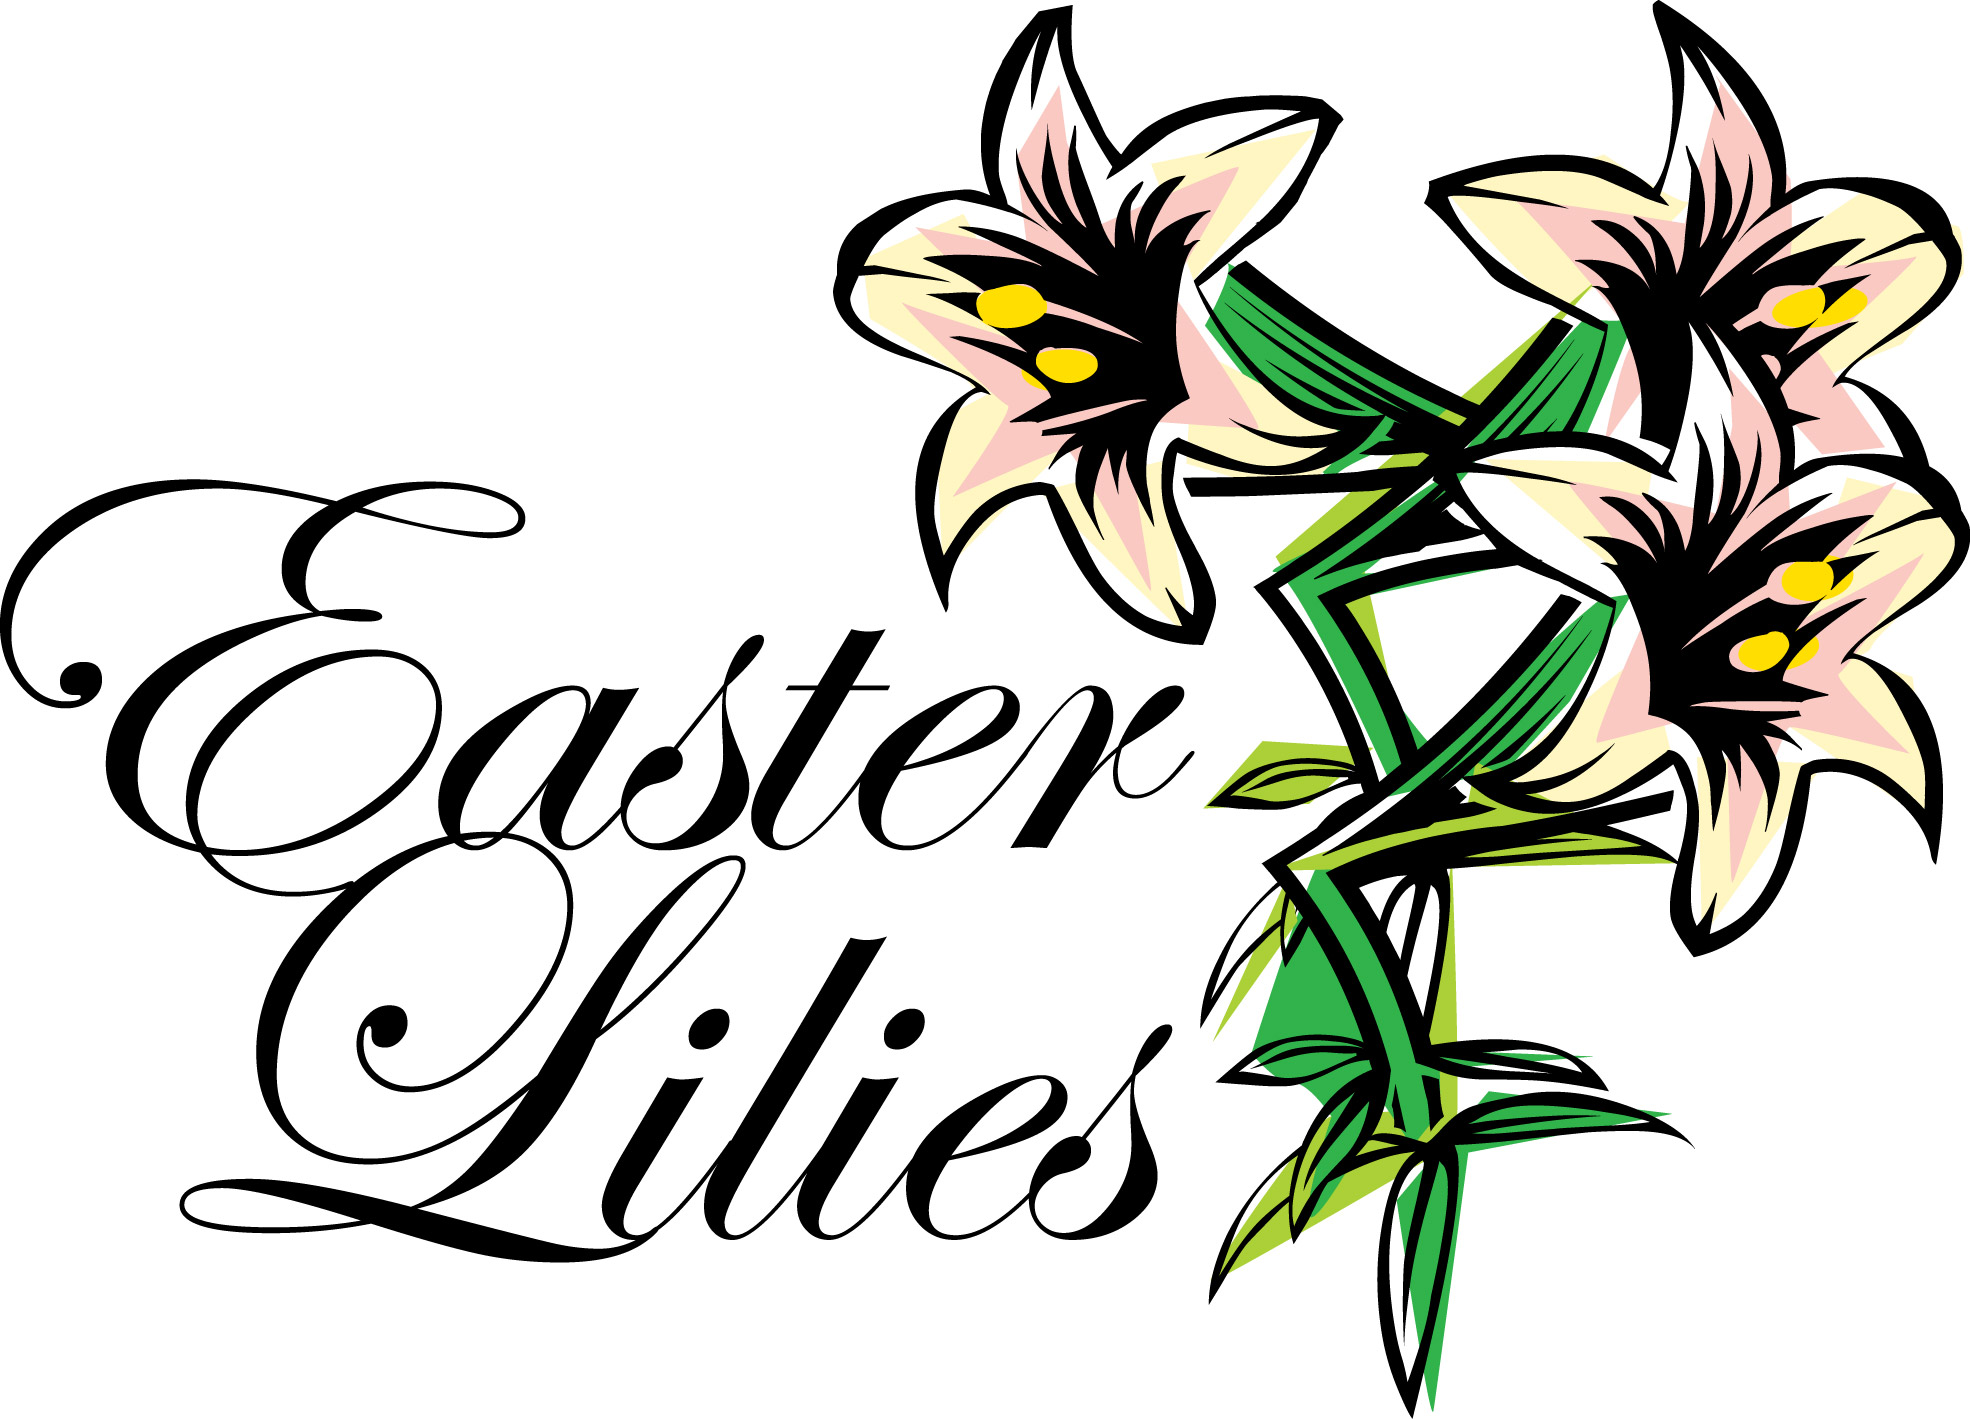 easter lily clipart black and white - photo #12